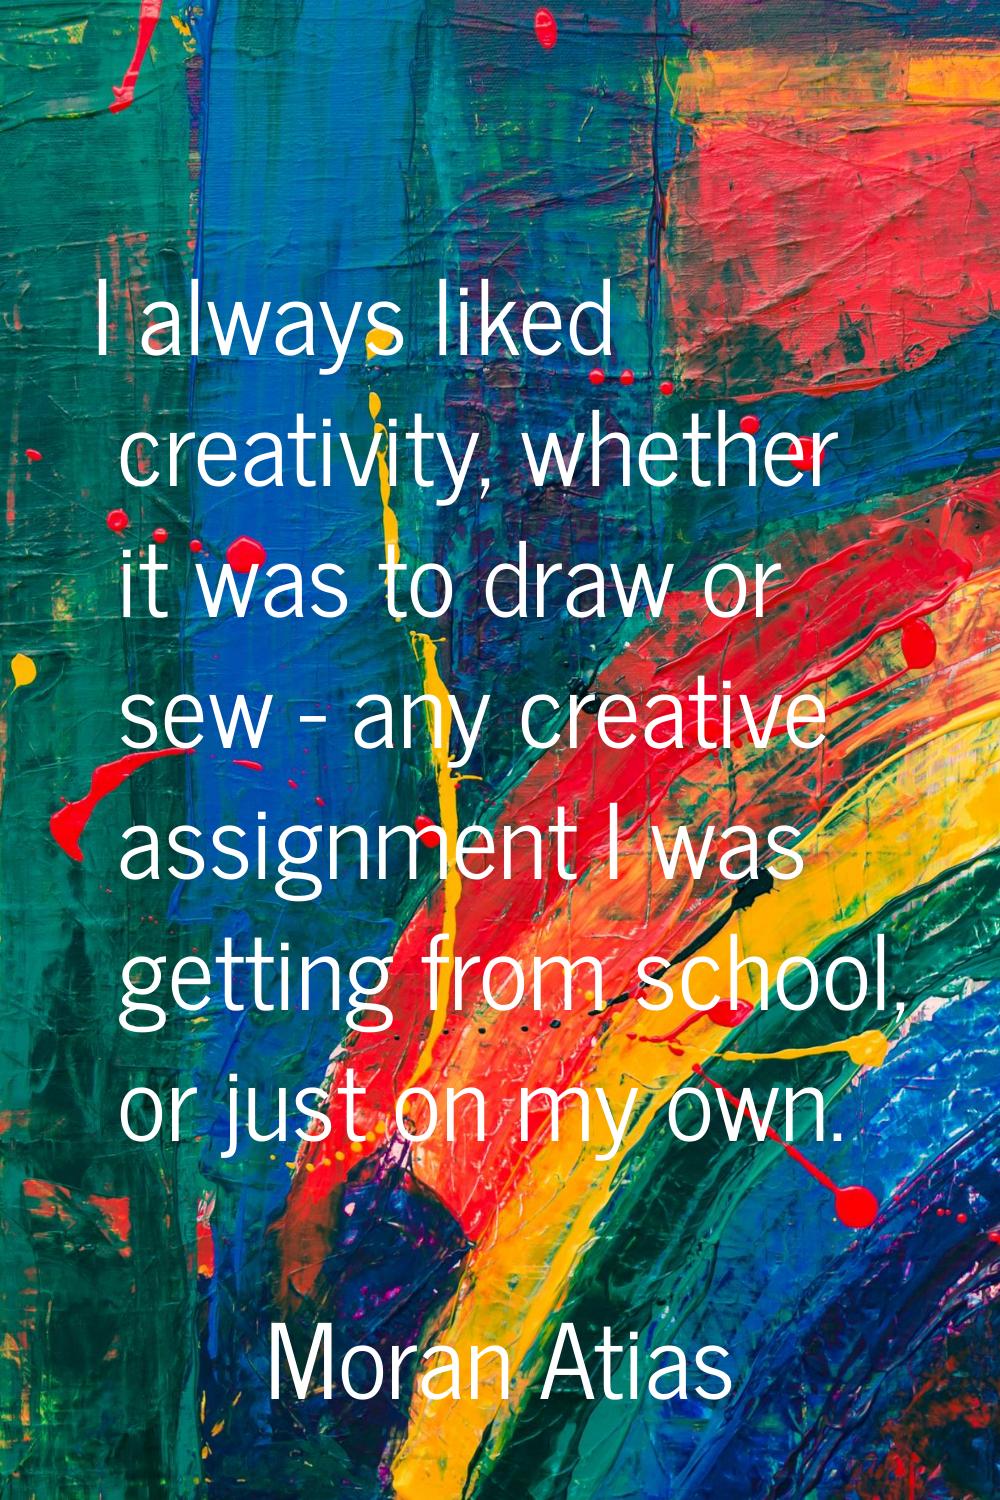 I always liked creativity, whether it was to draw or sew - any creative assignment I was getting fr